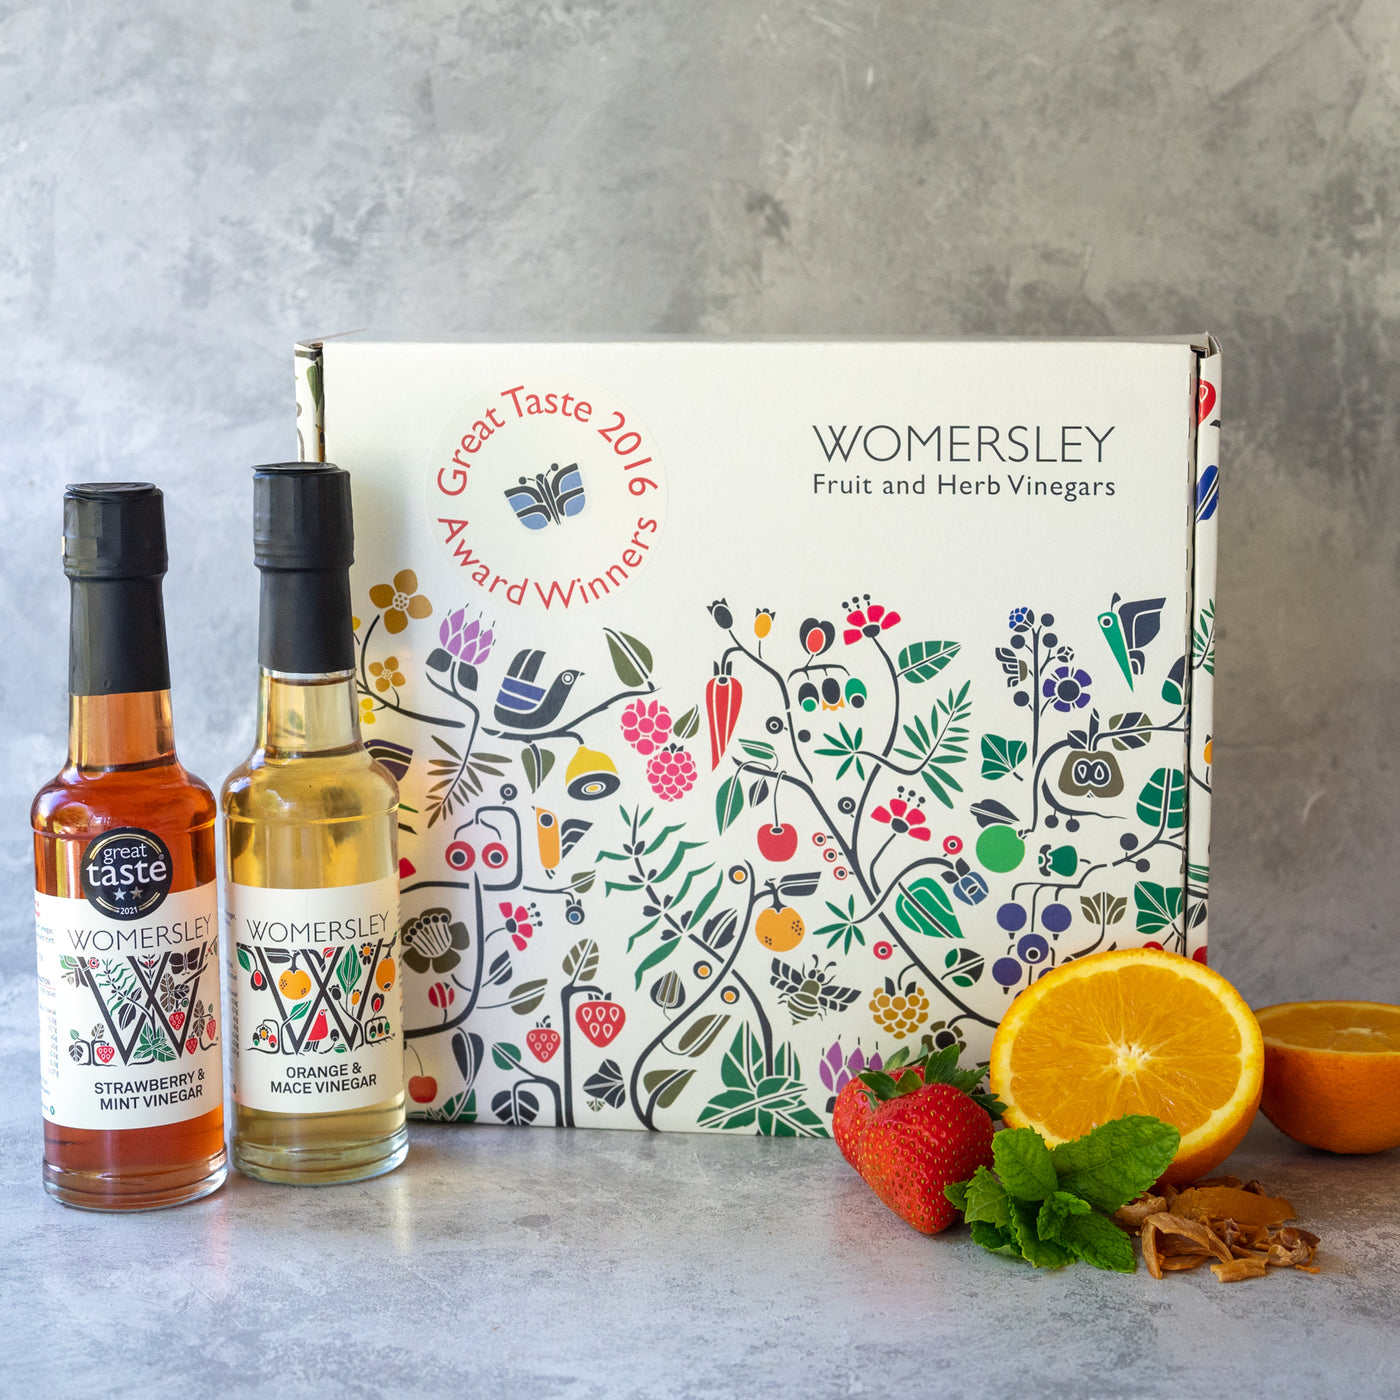 Womersley Foods Fruit & Herb vinegar closed Gift Box Great Taste Award Vinegars, with ingredients. Featuring 150ml Strawberry and Mint fruit vinegar and Orange and Mace fruit vinegar standing in front of box with image of strawberry, mint leaf, orange and mace on a grey background.